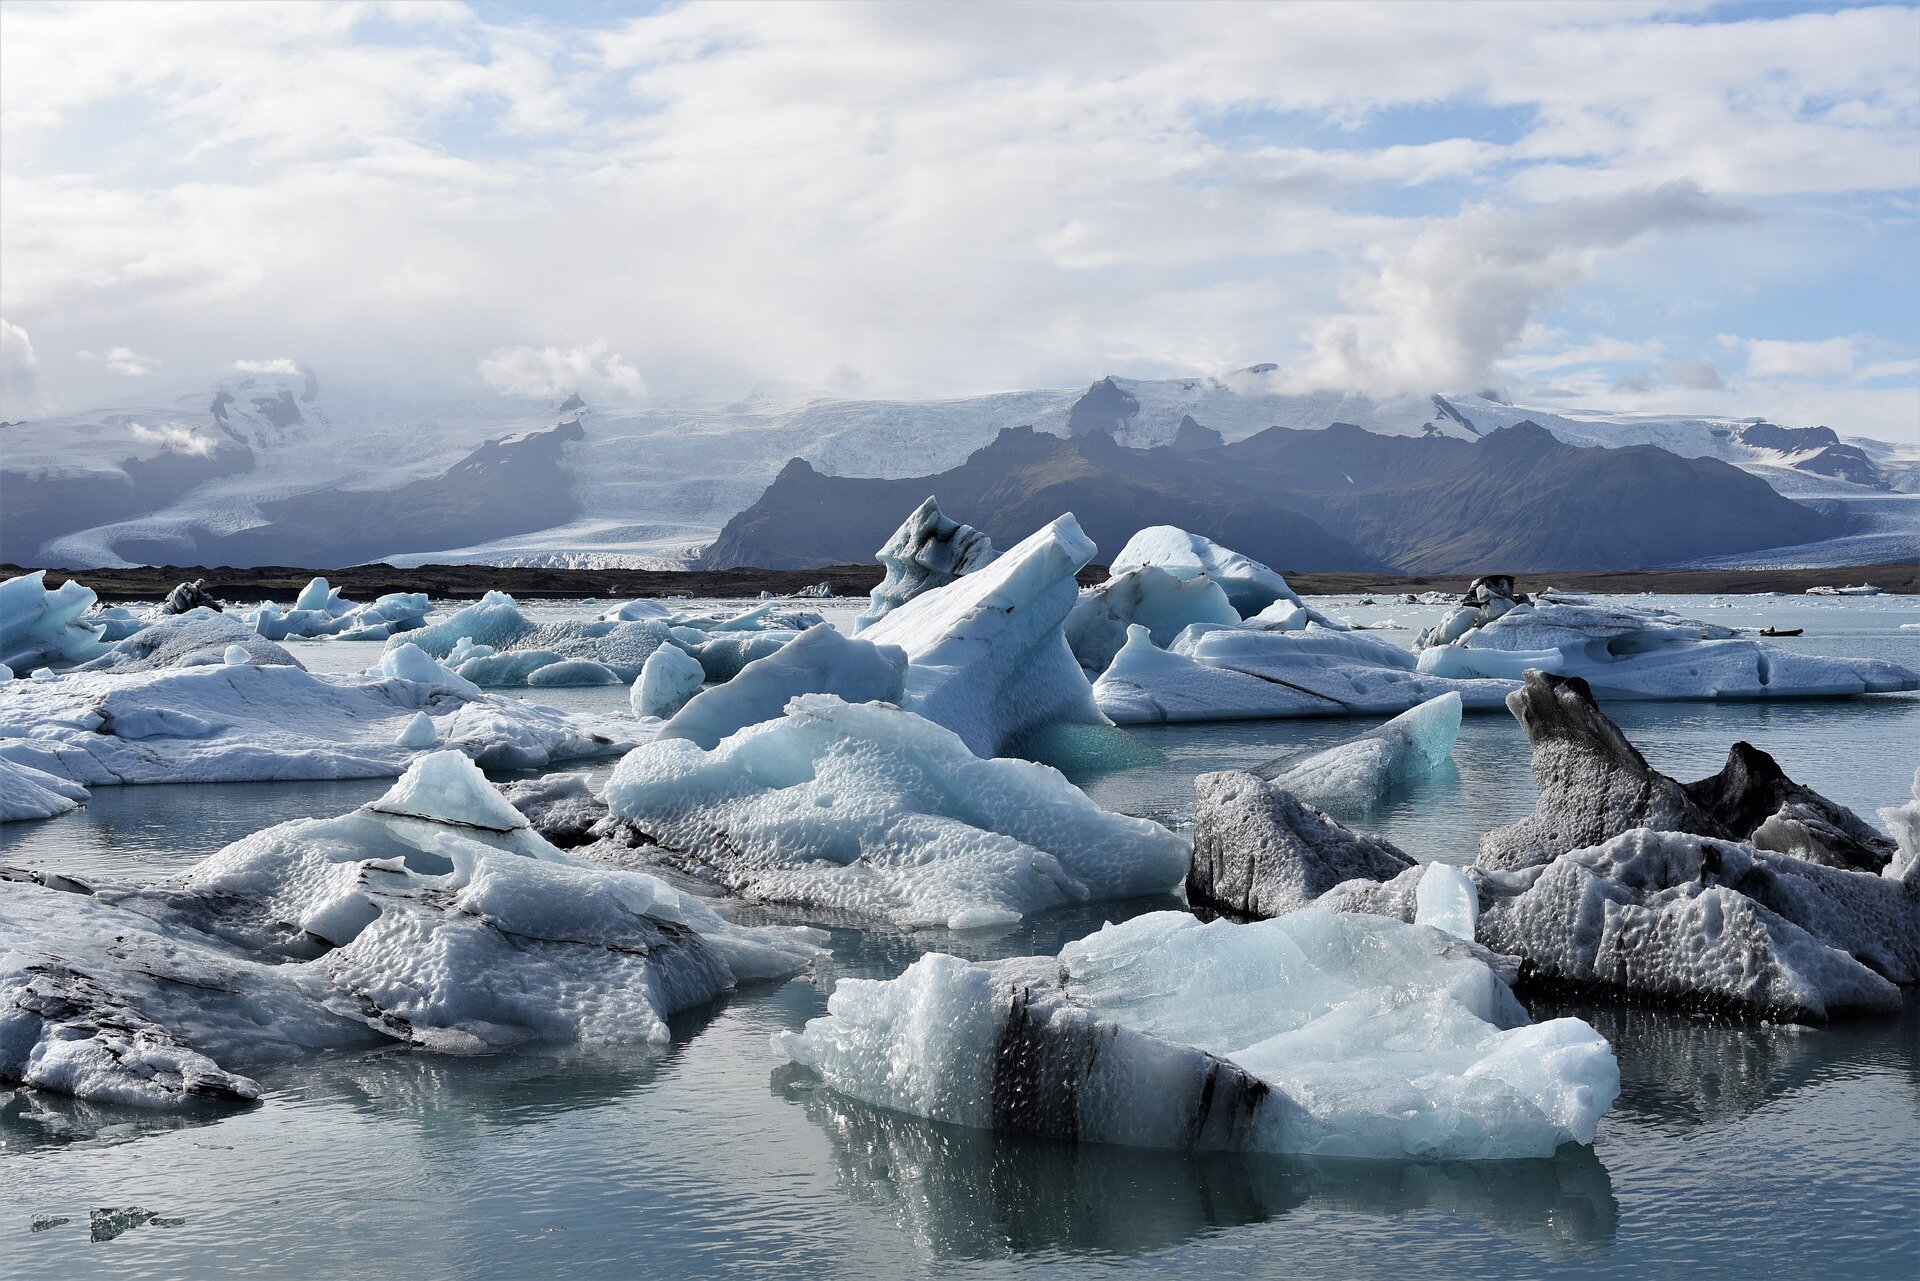 Researchers discover a new tool for reconstructing ancient sea ice to study climate change